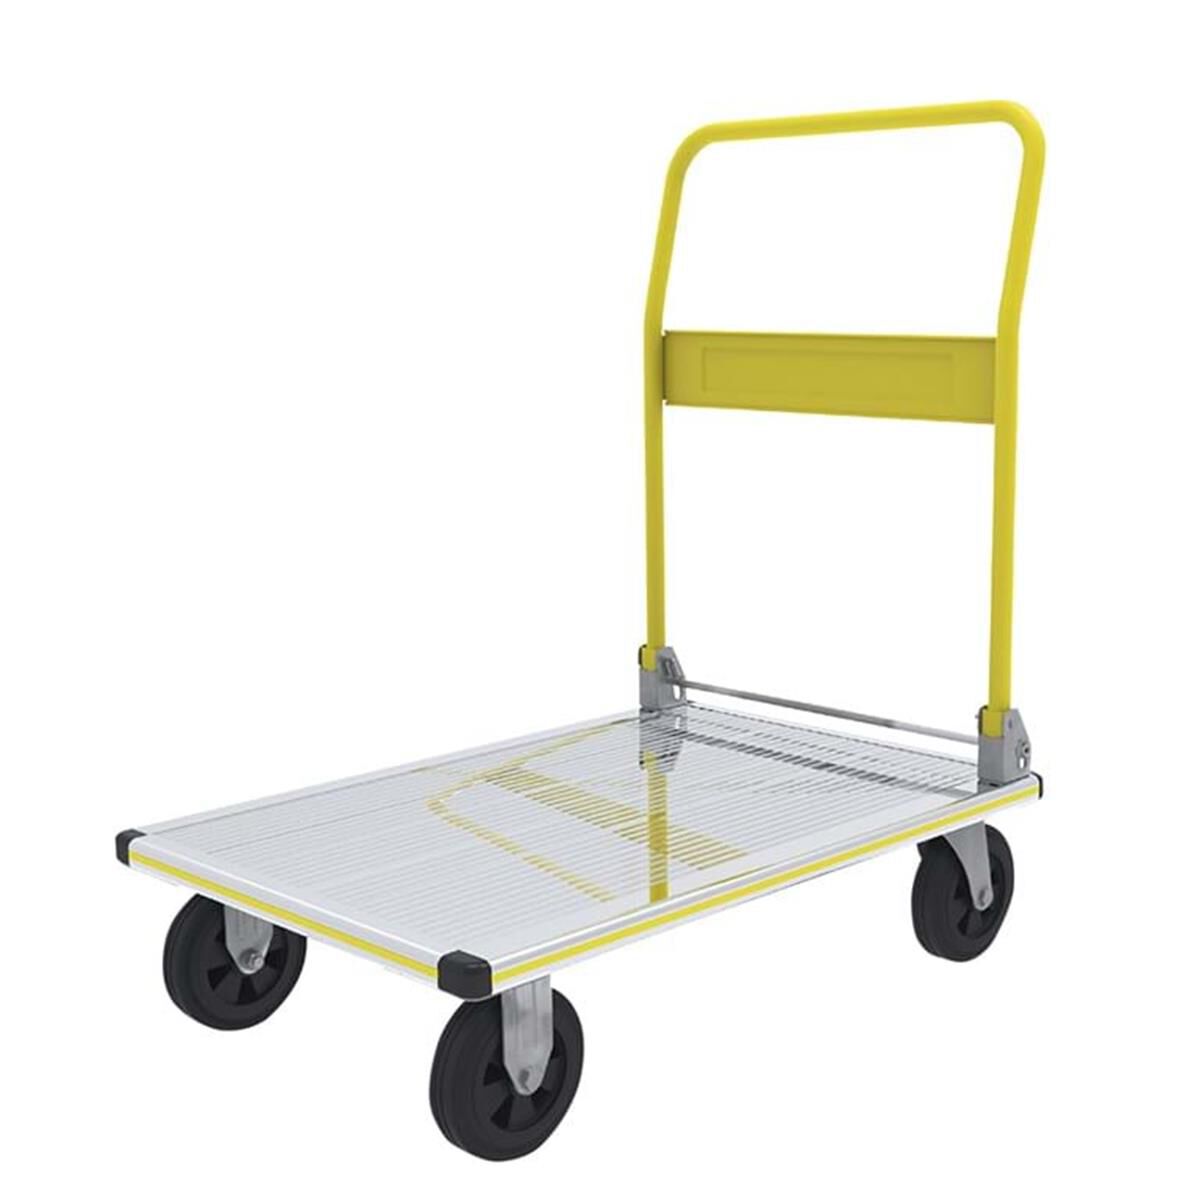 STANLEY HAND TROLLEY PLATFORM TRUCK 4 WHEEL 300KG -PC528, HAND TOOLS, Tools, Open Catalogue